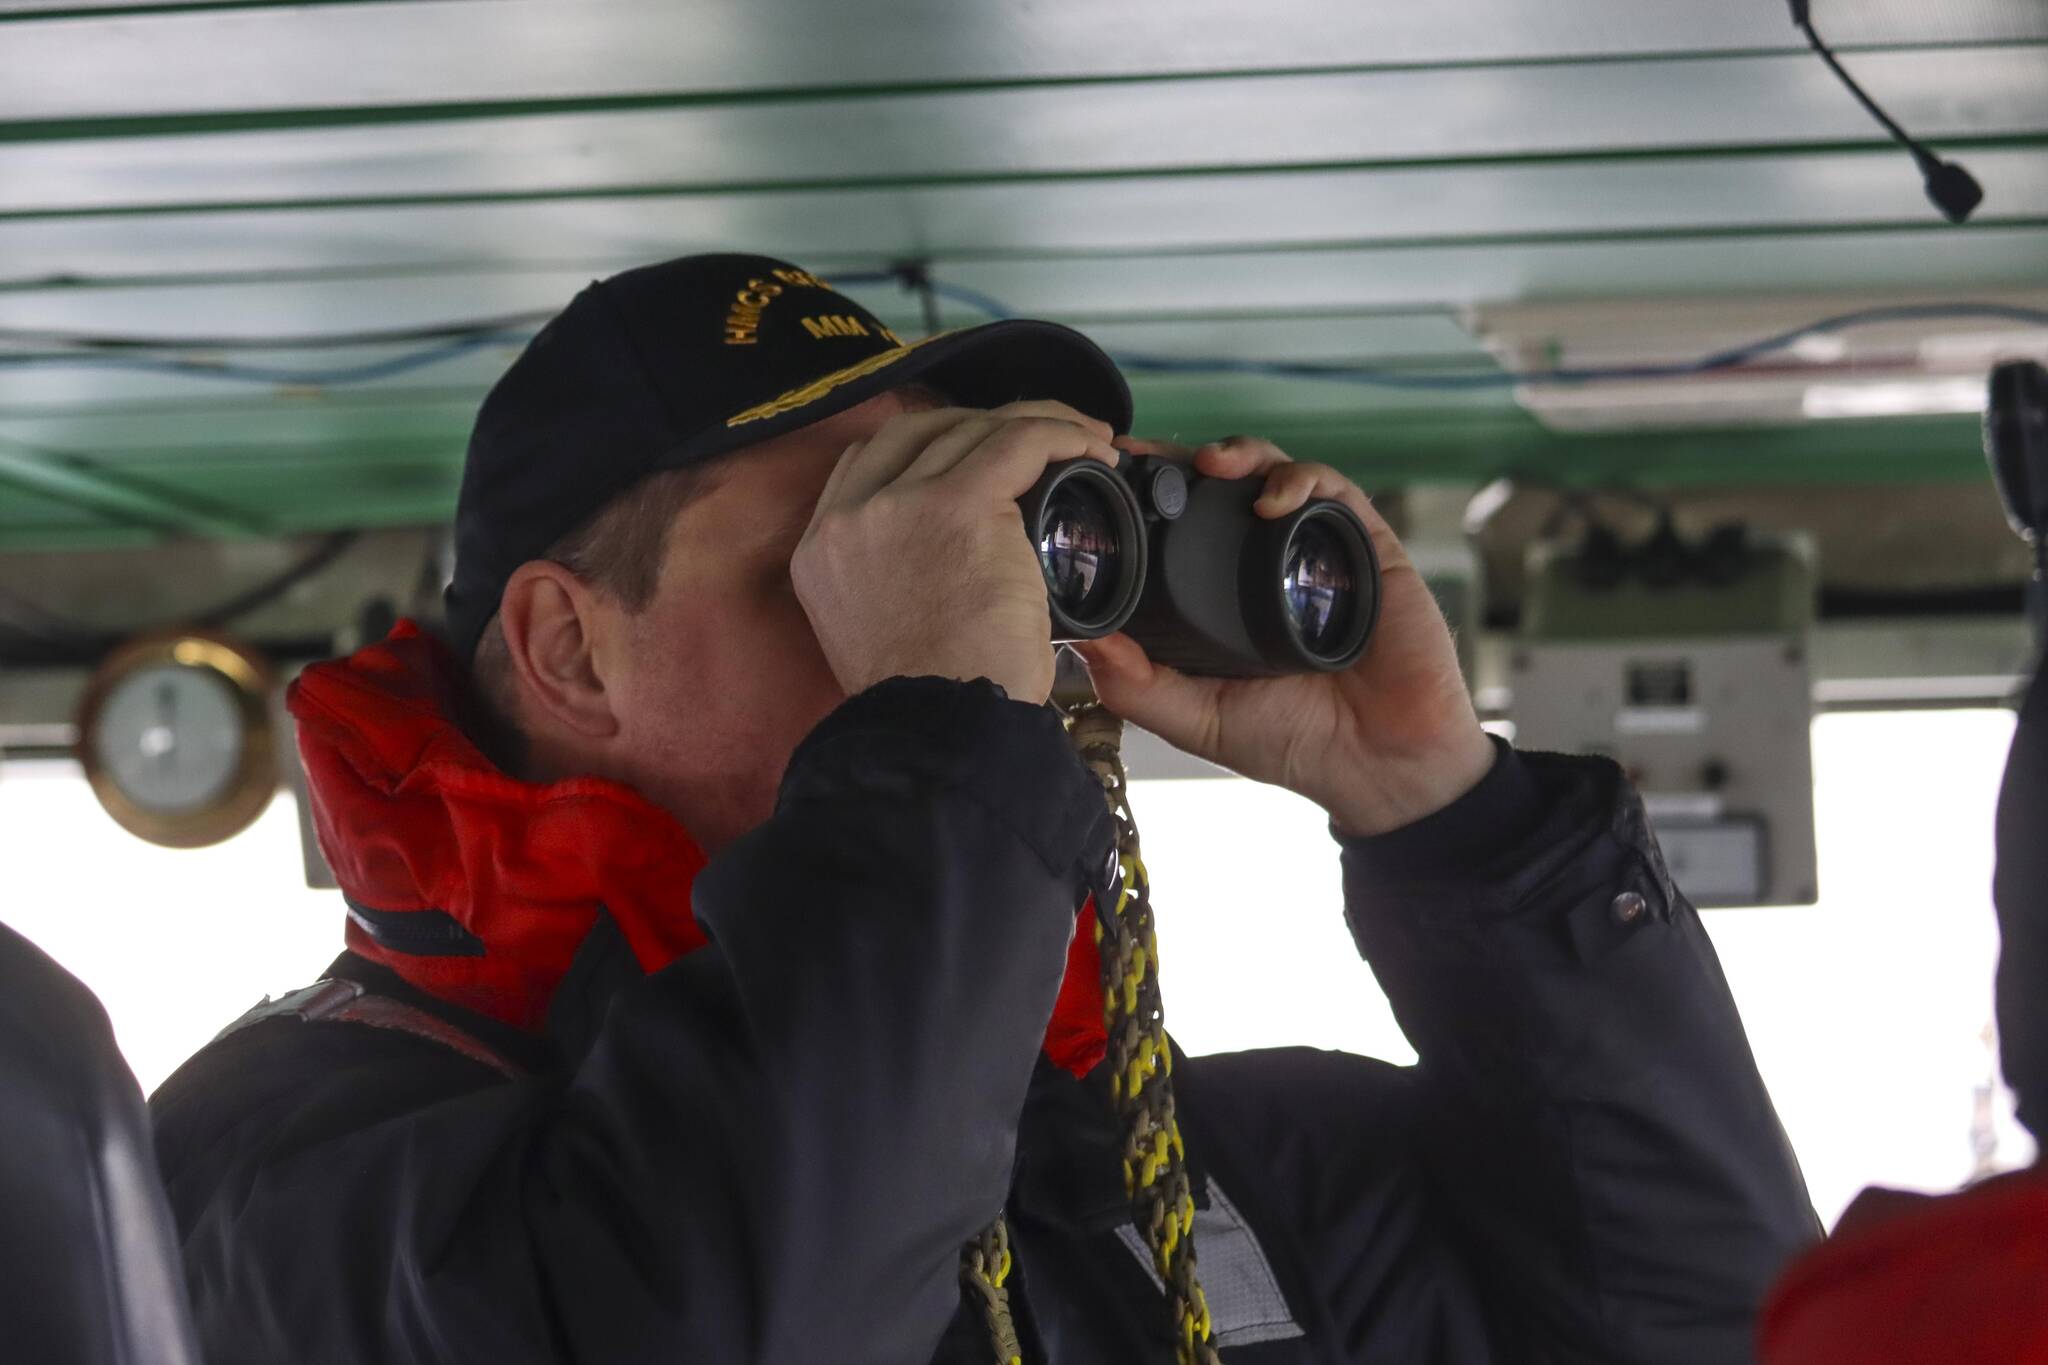 Lt. Cmdr. Mike Wills, captain of Her Majesty’s Canadian Ship Brandon, a minesweeping vessel, looks at a small boat deployed from the ship in the Stephens Passage on March 6, 2022 as part of exercise Arctic Edge 2022. (Michael S. Lockett / Juneau Empire)